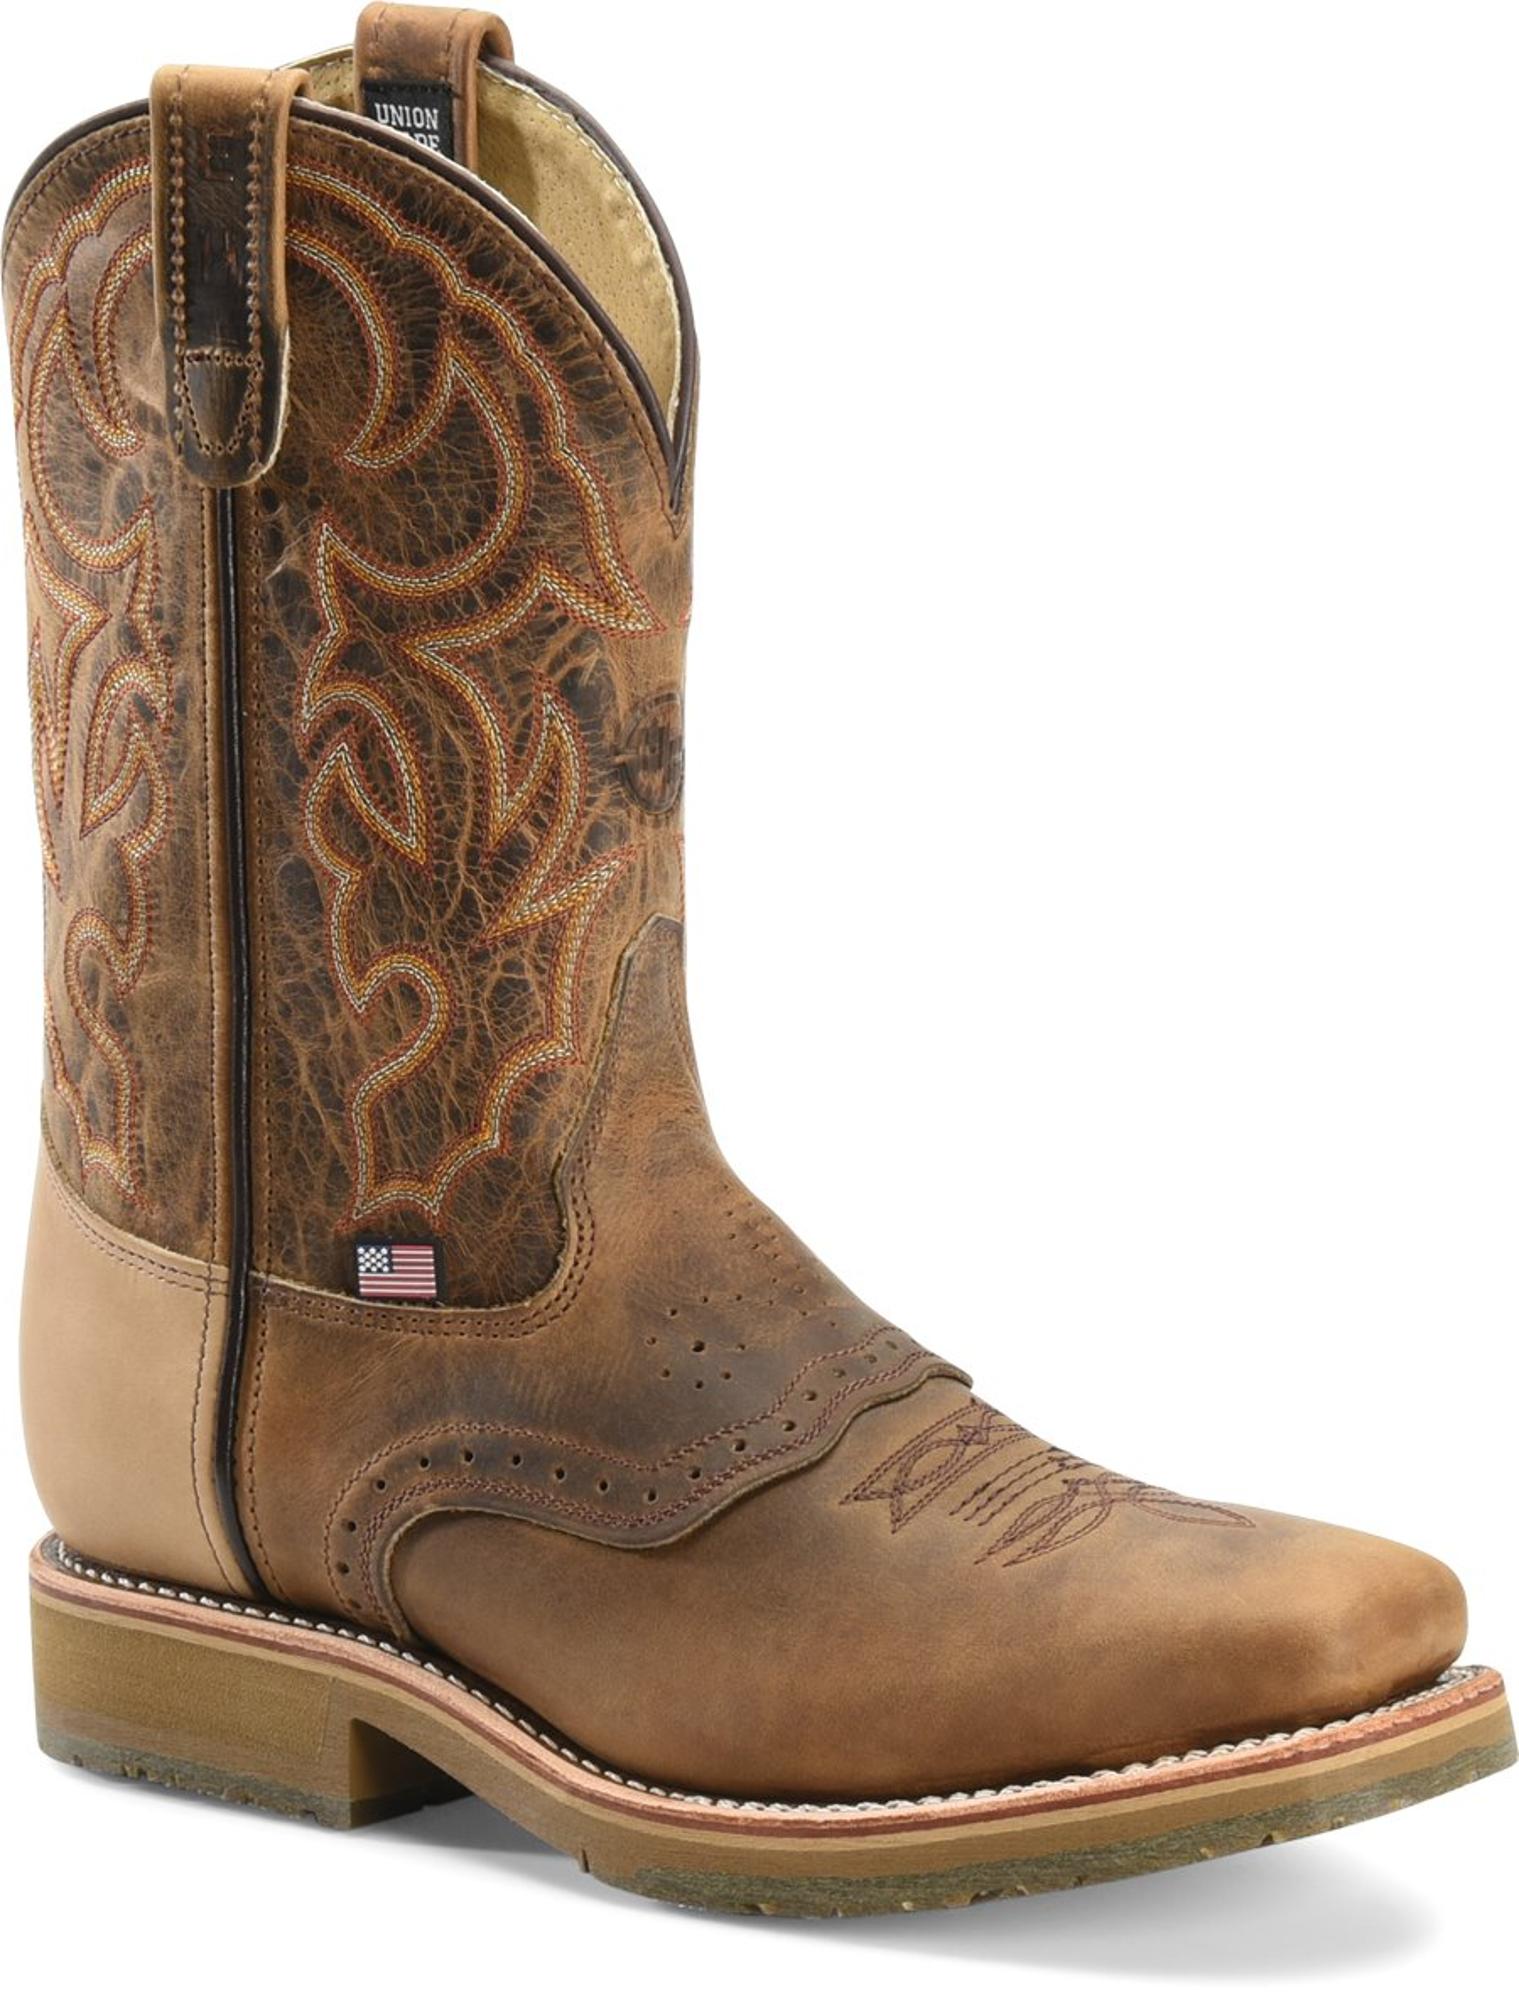 Double- H Dwight Steel Toe Pull On Boots